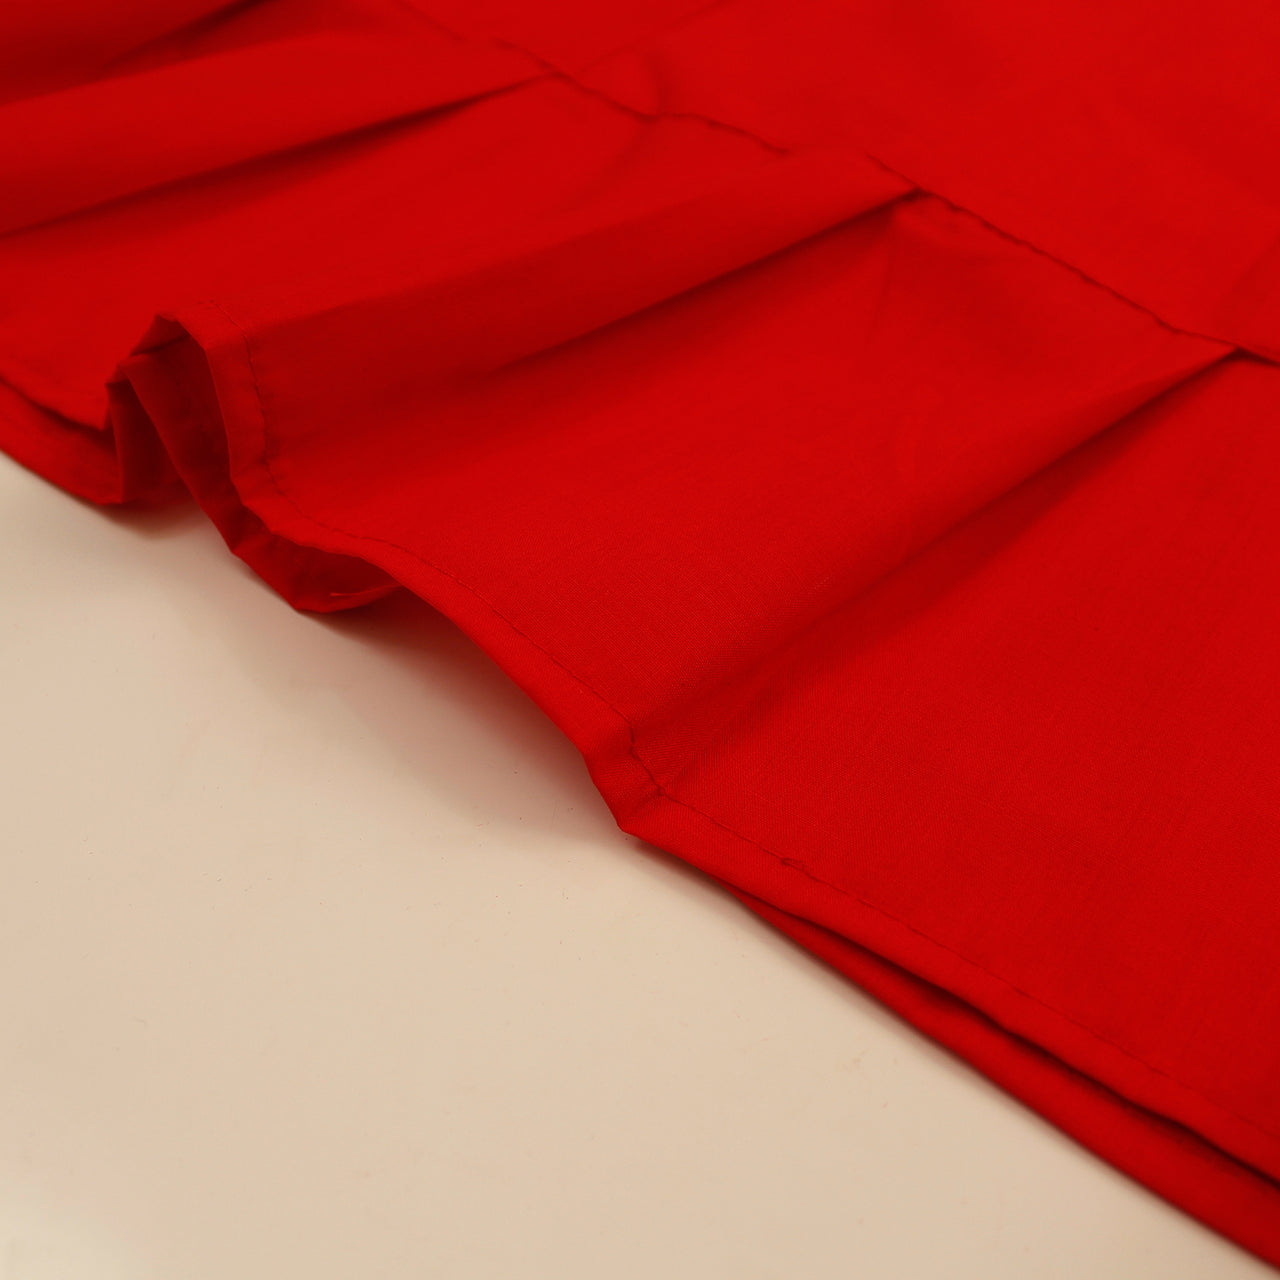 Red - Sari (Saree) Petticoat - Available in S, M, L & XL - Underskirts For Sari's